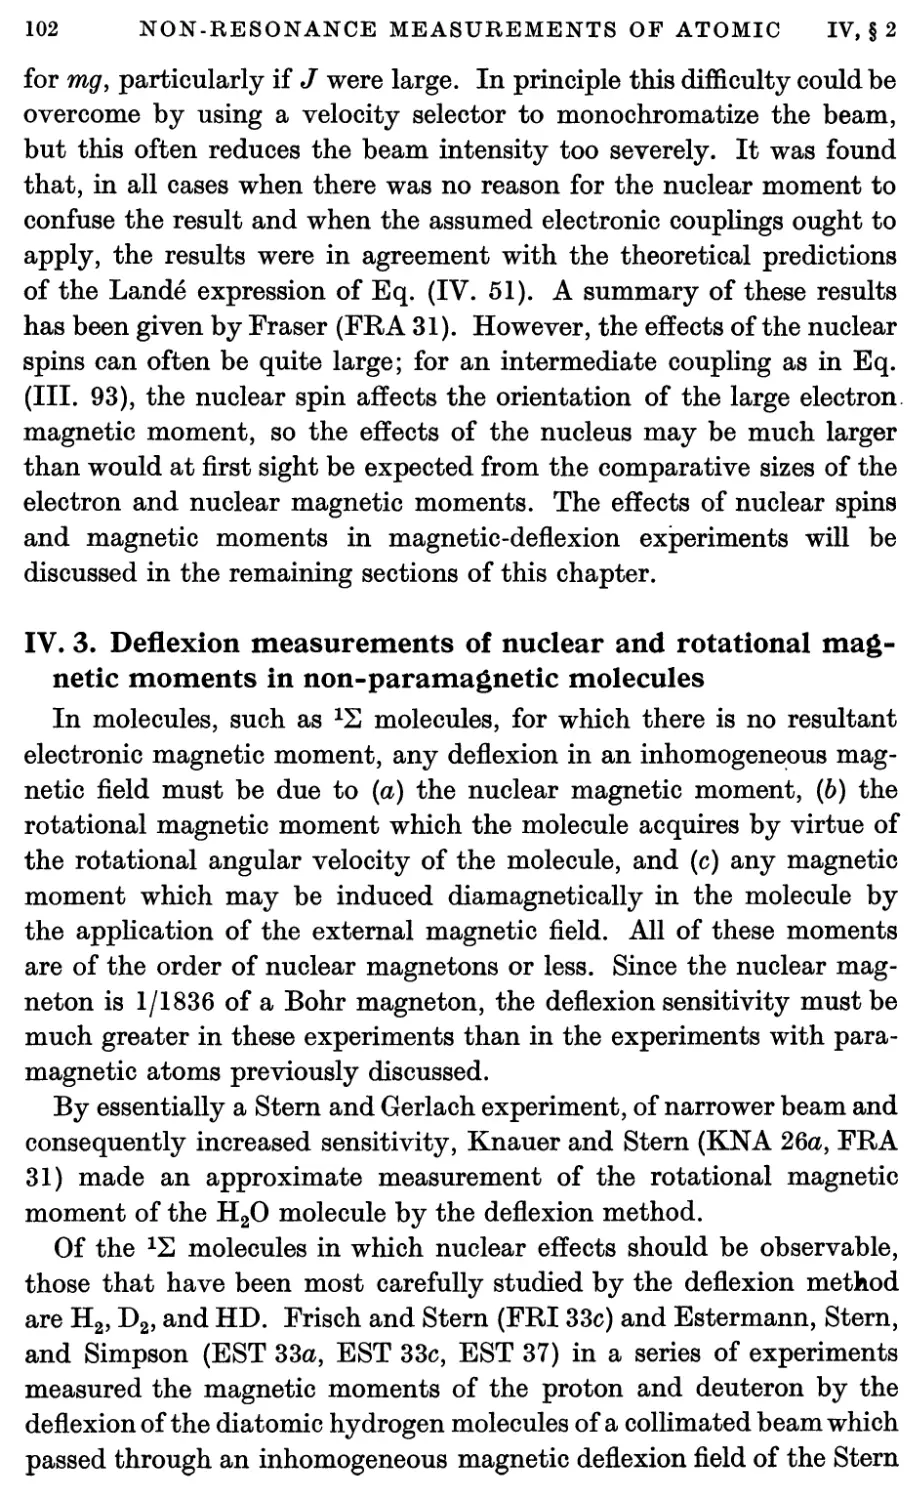 IV.3. Deflexion Measurements of Nuclear and Rotational Magnetic Moments in Non-paramagnetic Molecules